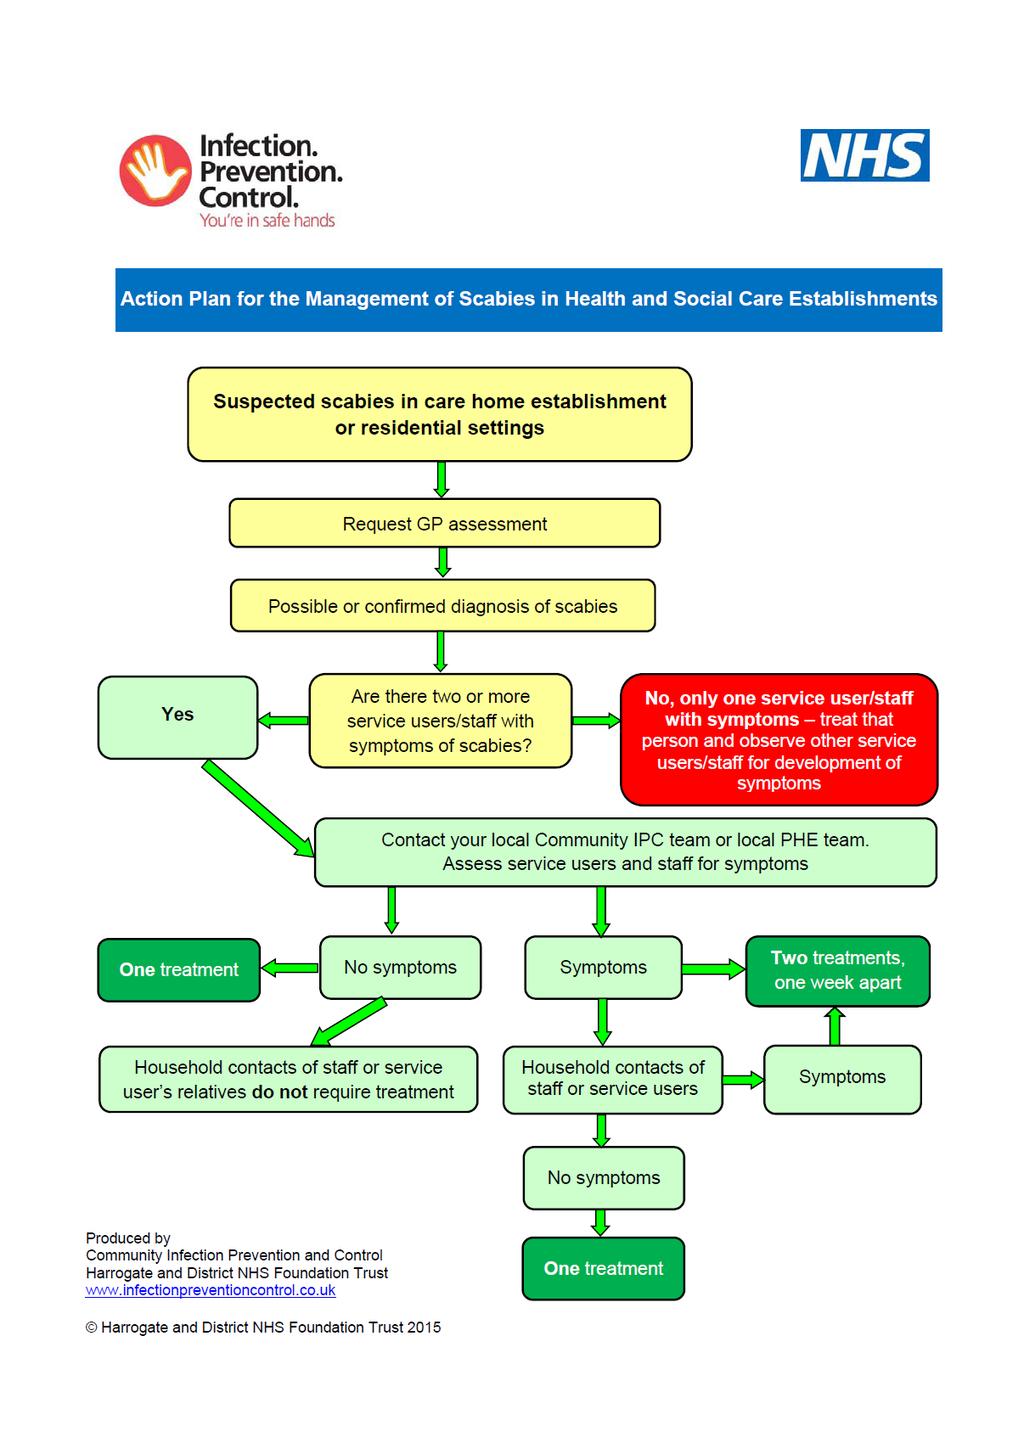 Appendix 2: Action Plan for Management of Scabies in Health and Social Care